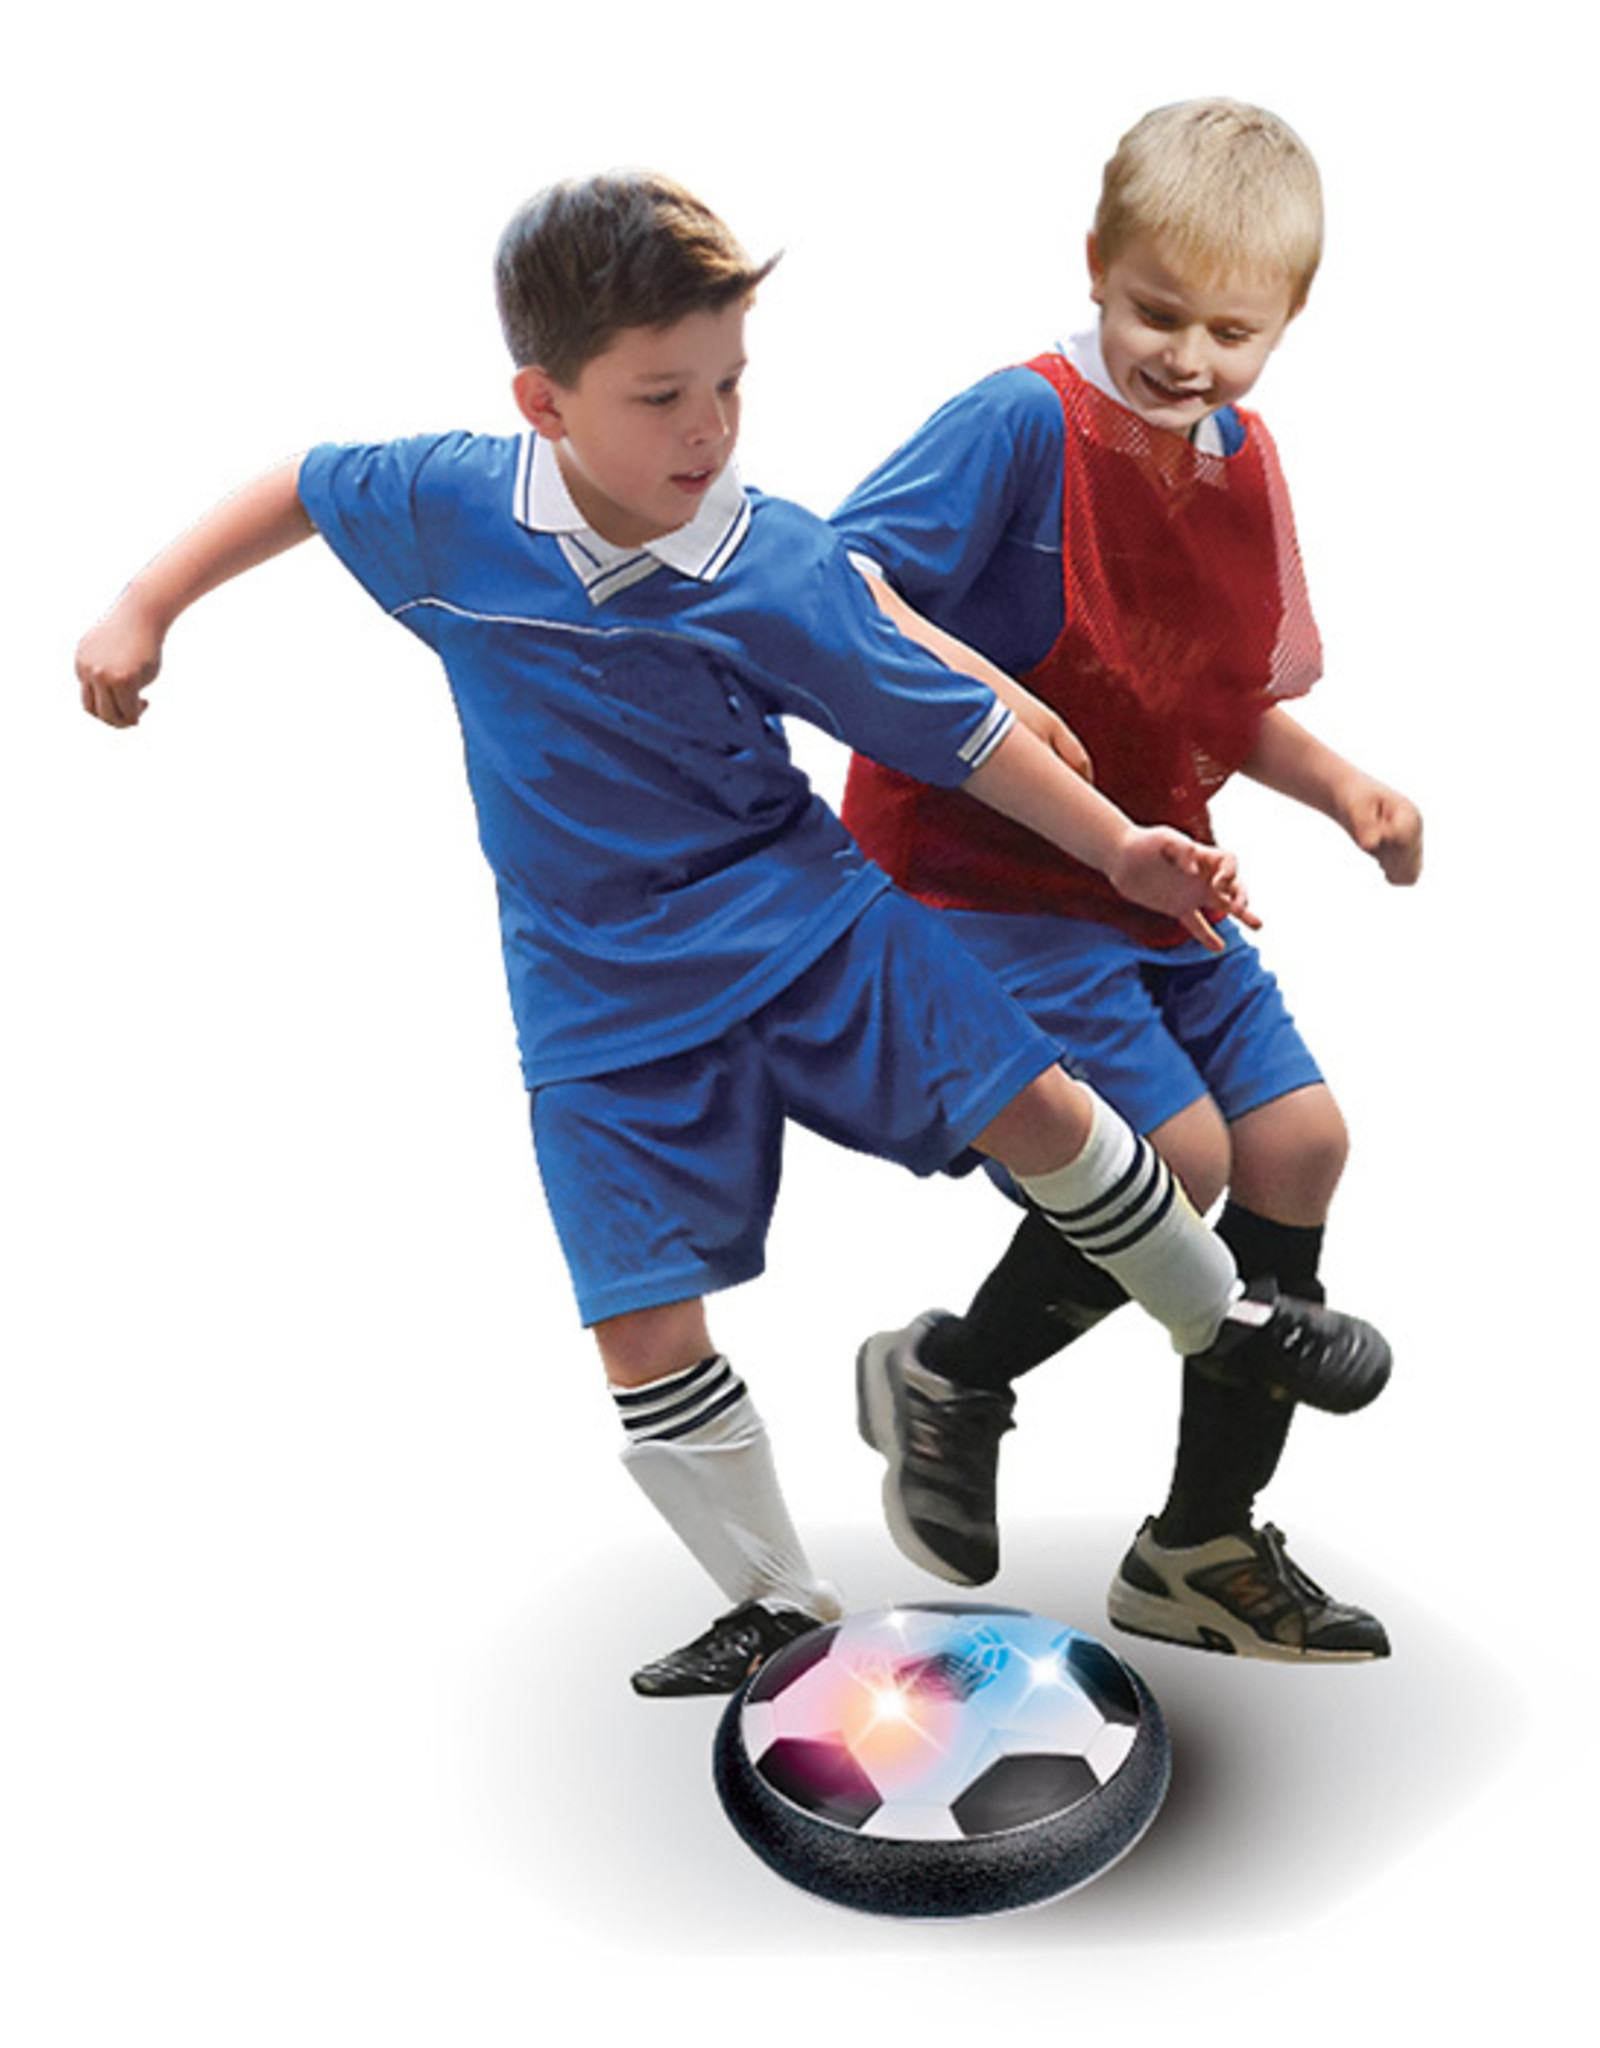 The Hovering Soccer Ball Set